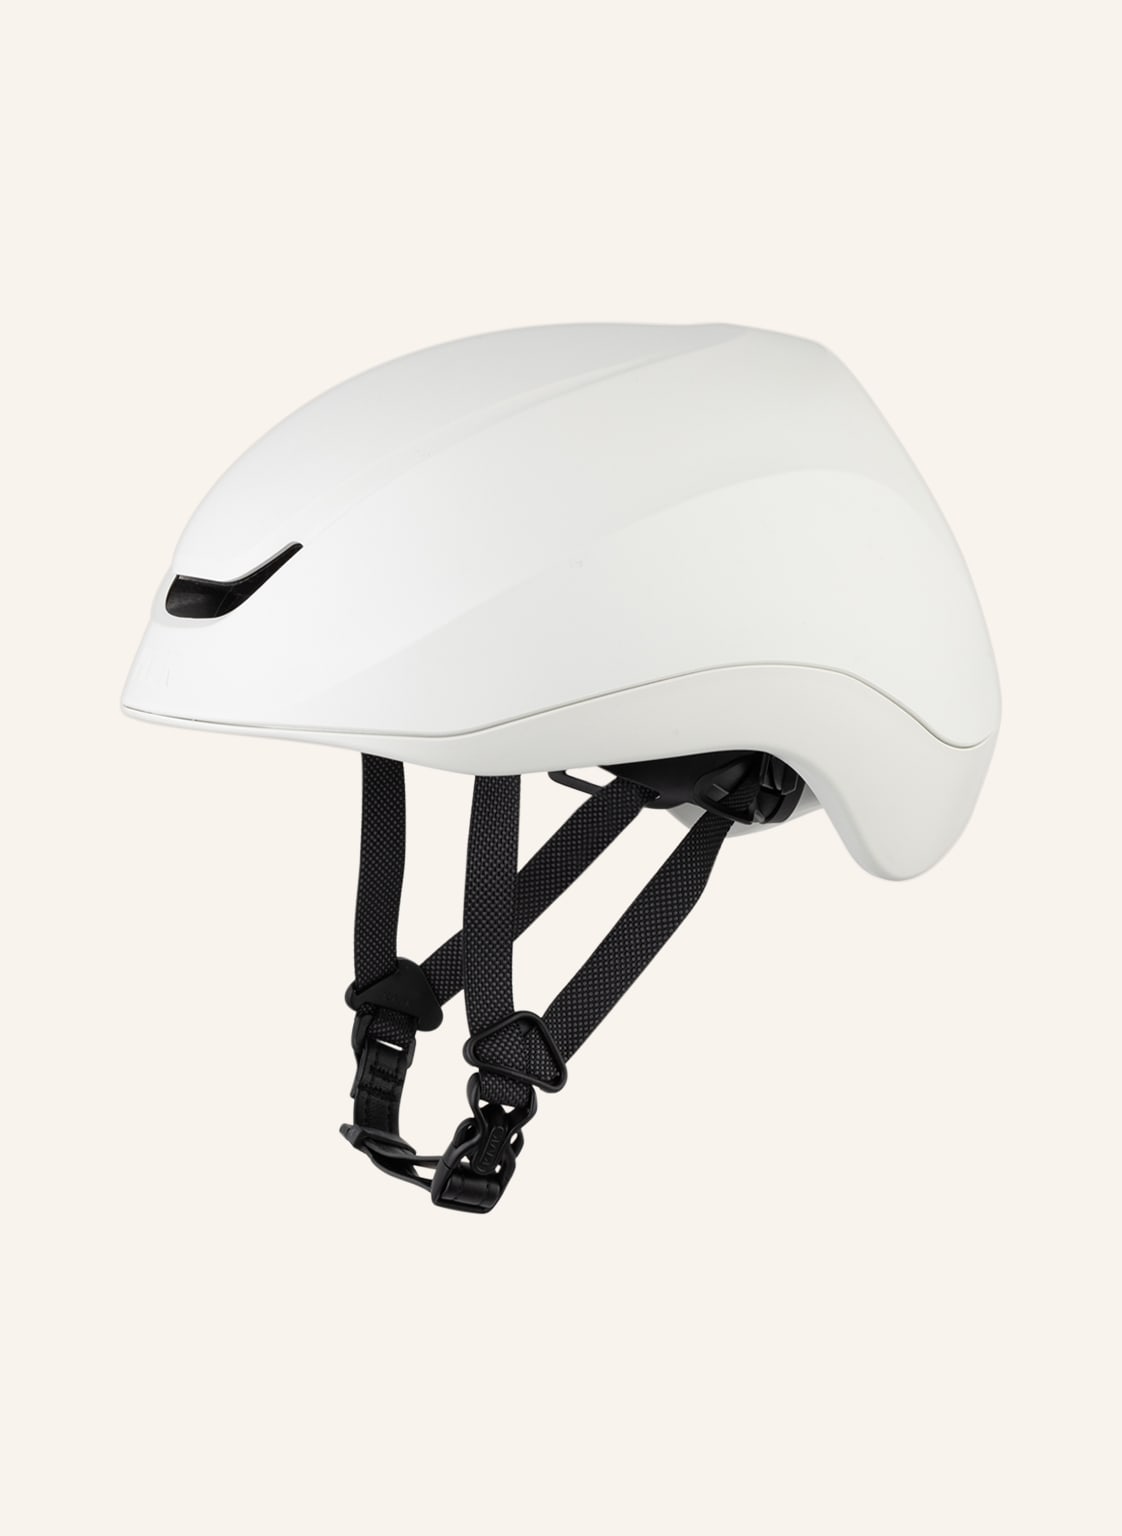 Image of Kask Fahrradhelm Moebius weiss